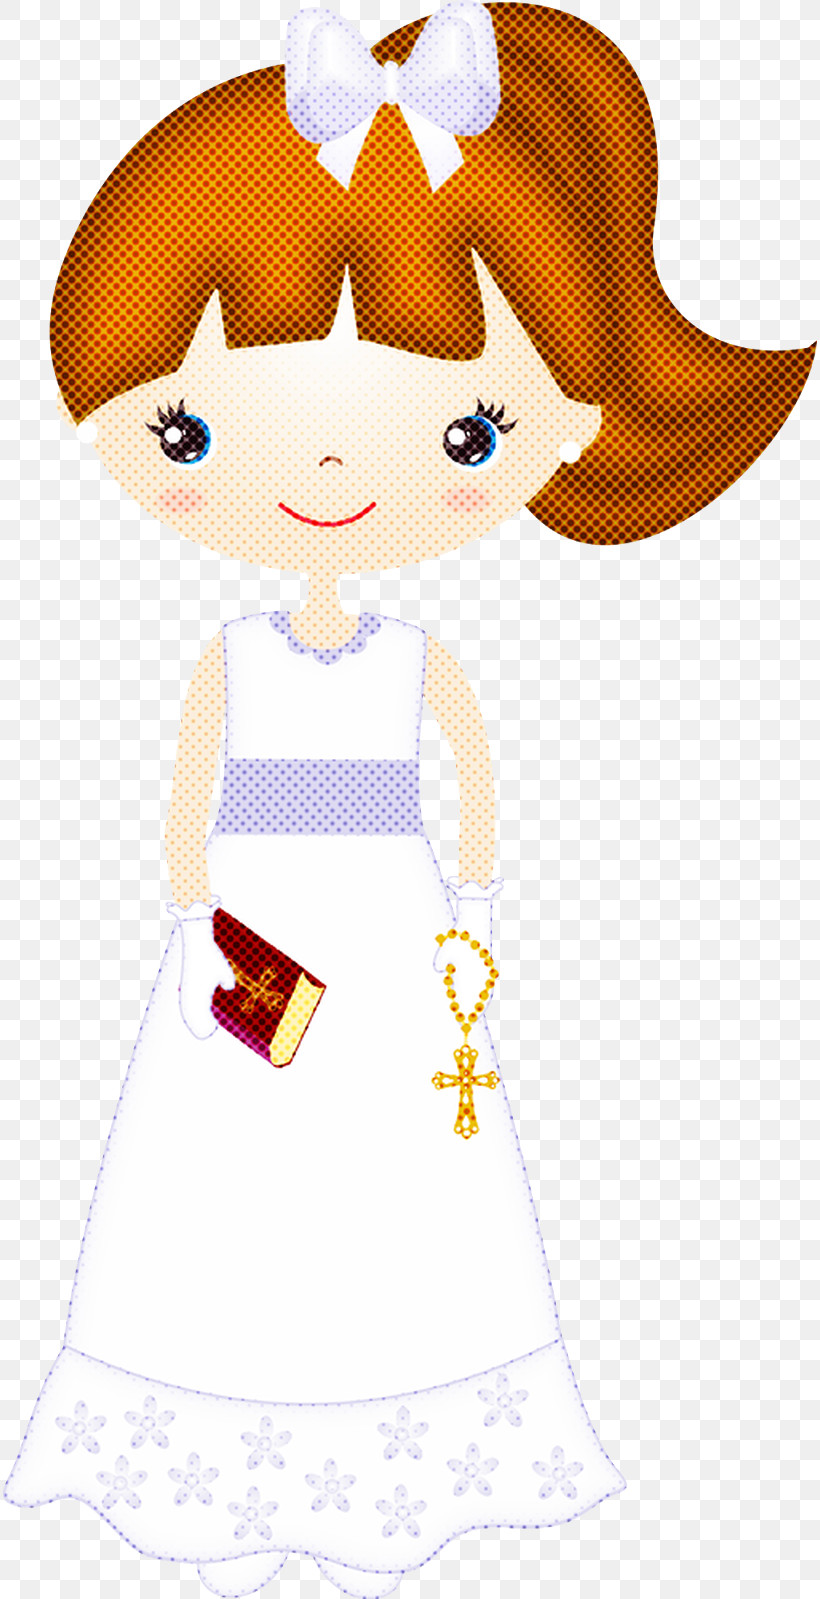 Cartoon Angel Style, PNG, 814x1599px, Cartoon, Angel, Style Download Free